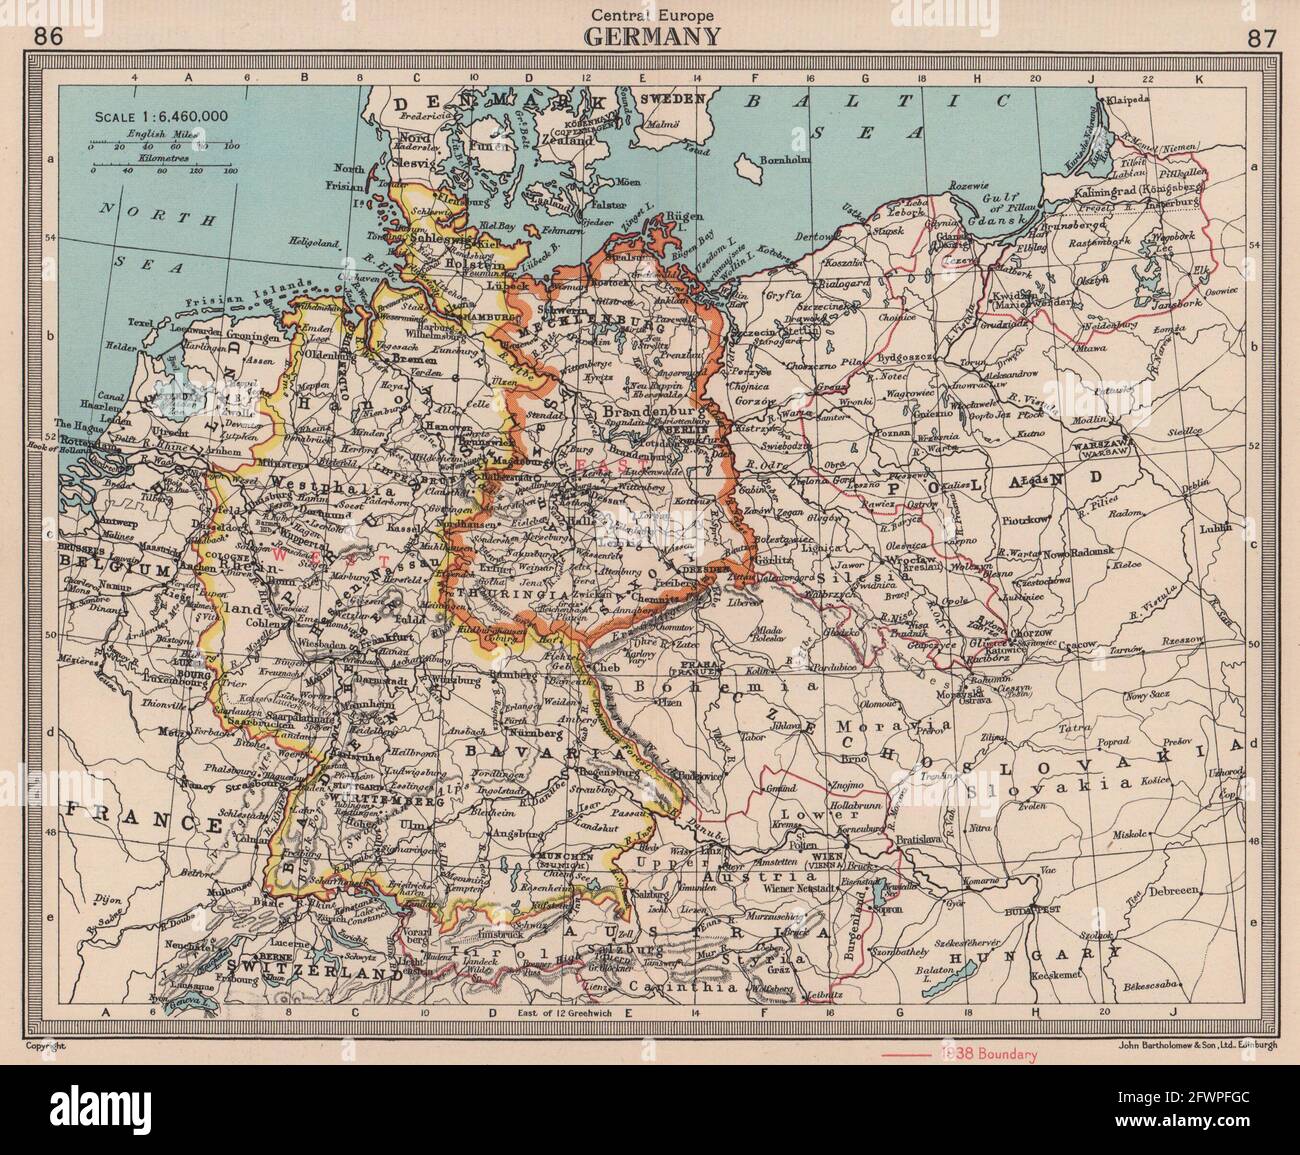 West & East Germany. 1938 borders in red. BARTHOLOMEW 1949 old vintage map Stock Photo